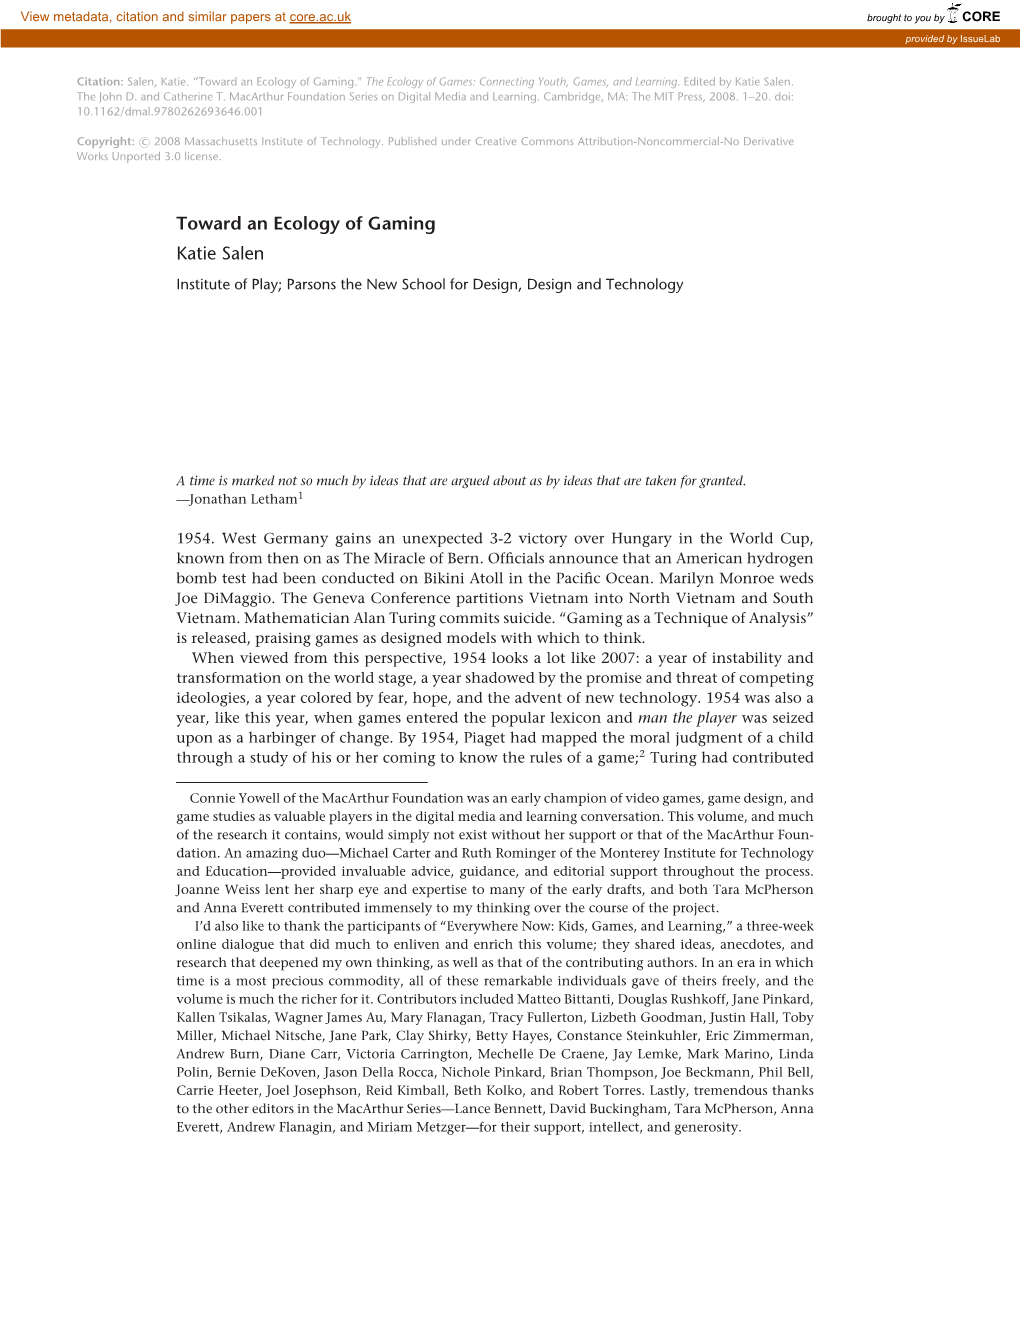 Toward an Ecology of Gaming." the Ecology of Games: Connecting Youth, Games, and Learning.Edited by Katie Salen